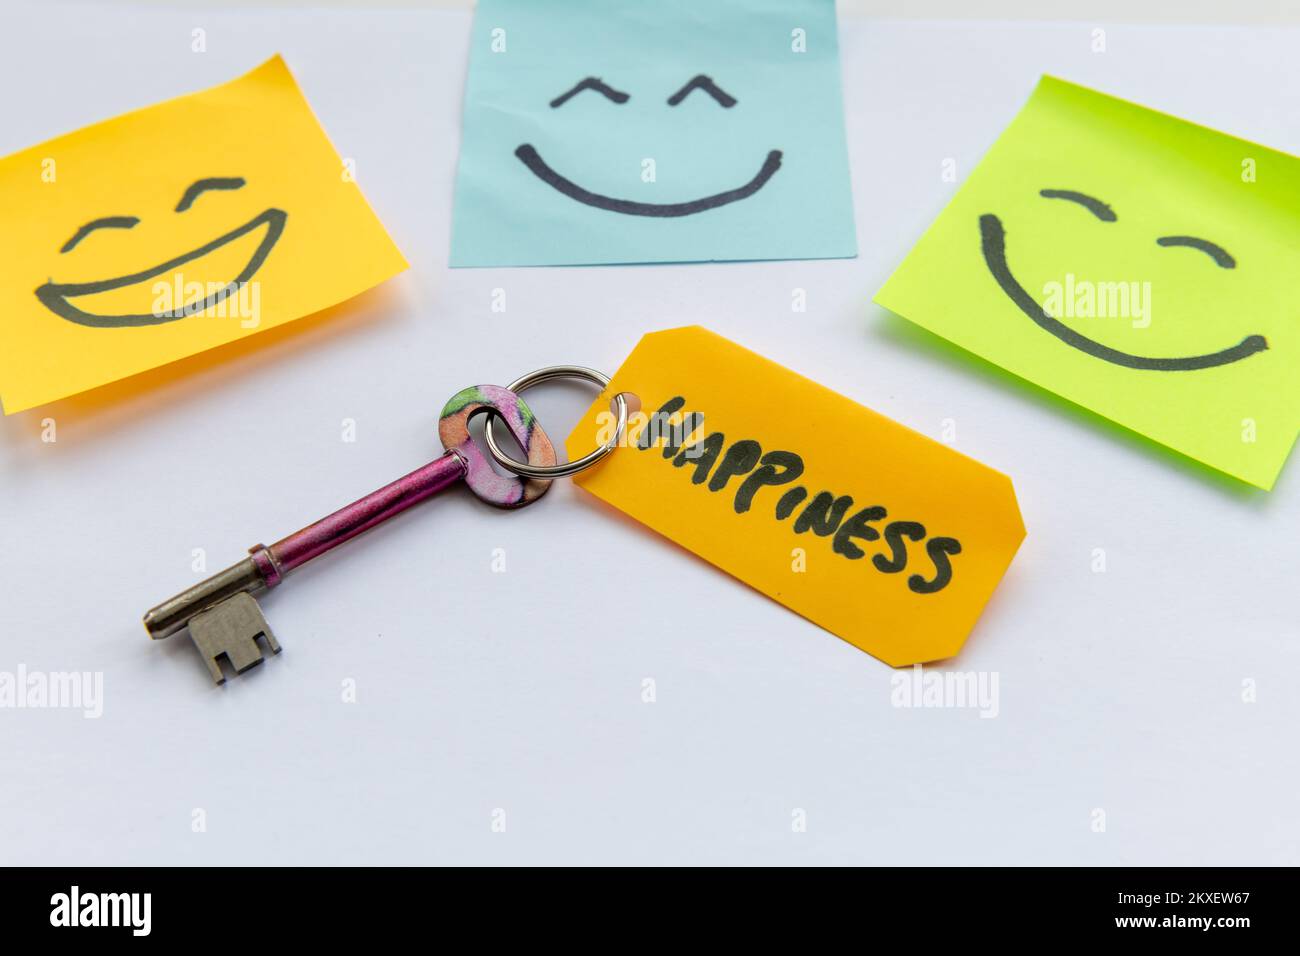 A key to happiness concept with a key and hand drawn happy faces isolated in a white background. Stock Photo